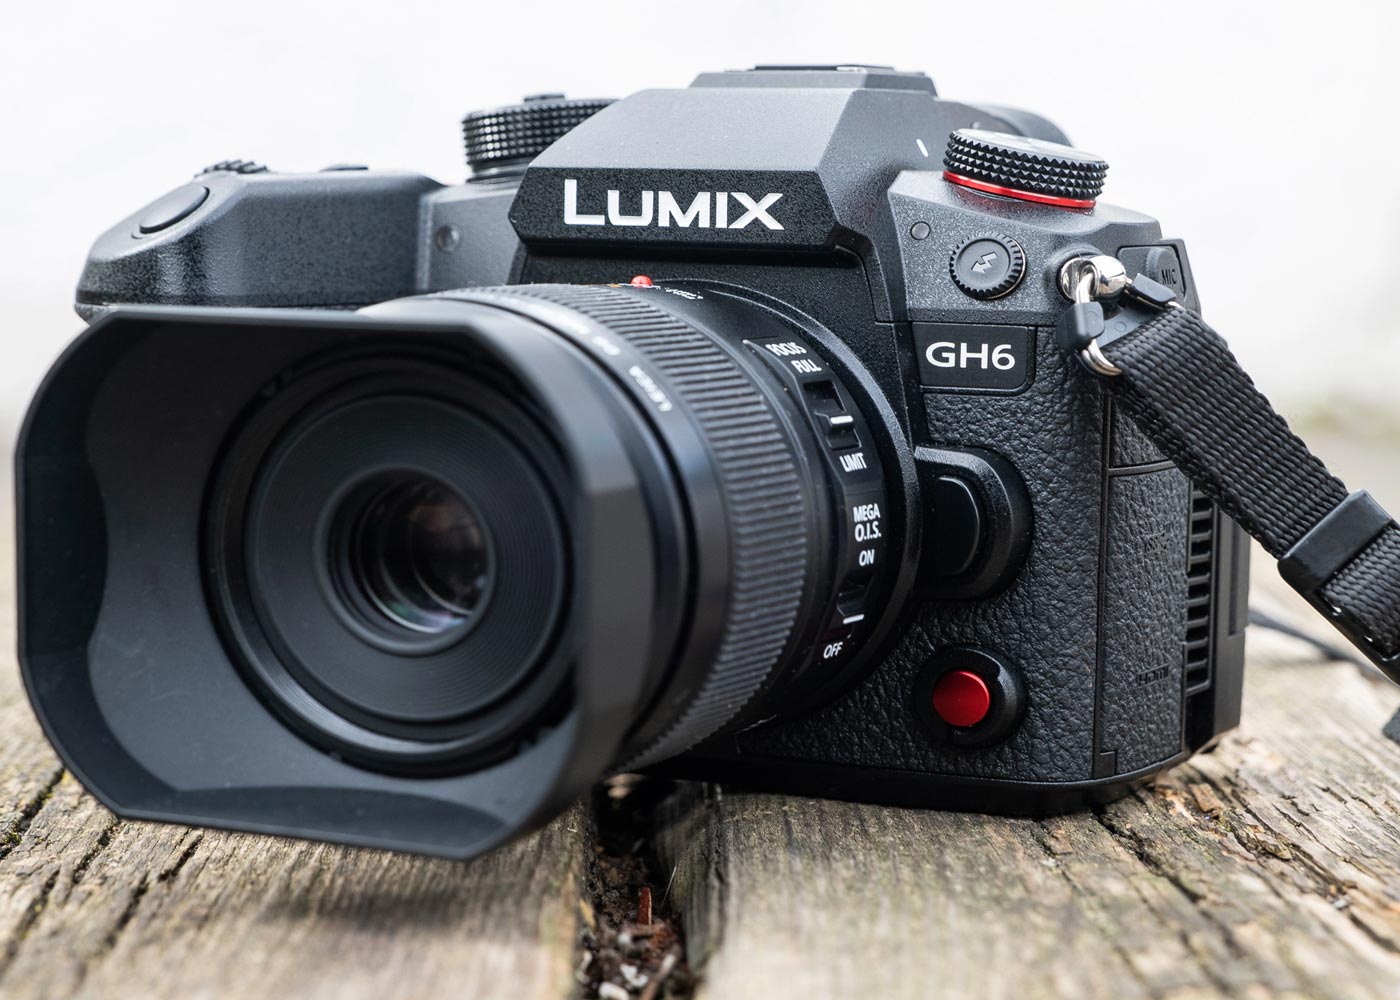 Production House Guide: Panasonic LUMIX GH6 Firmware 2.3